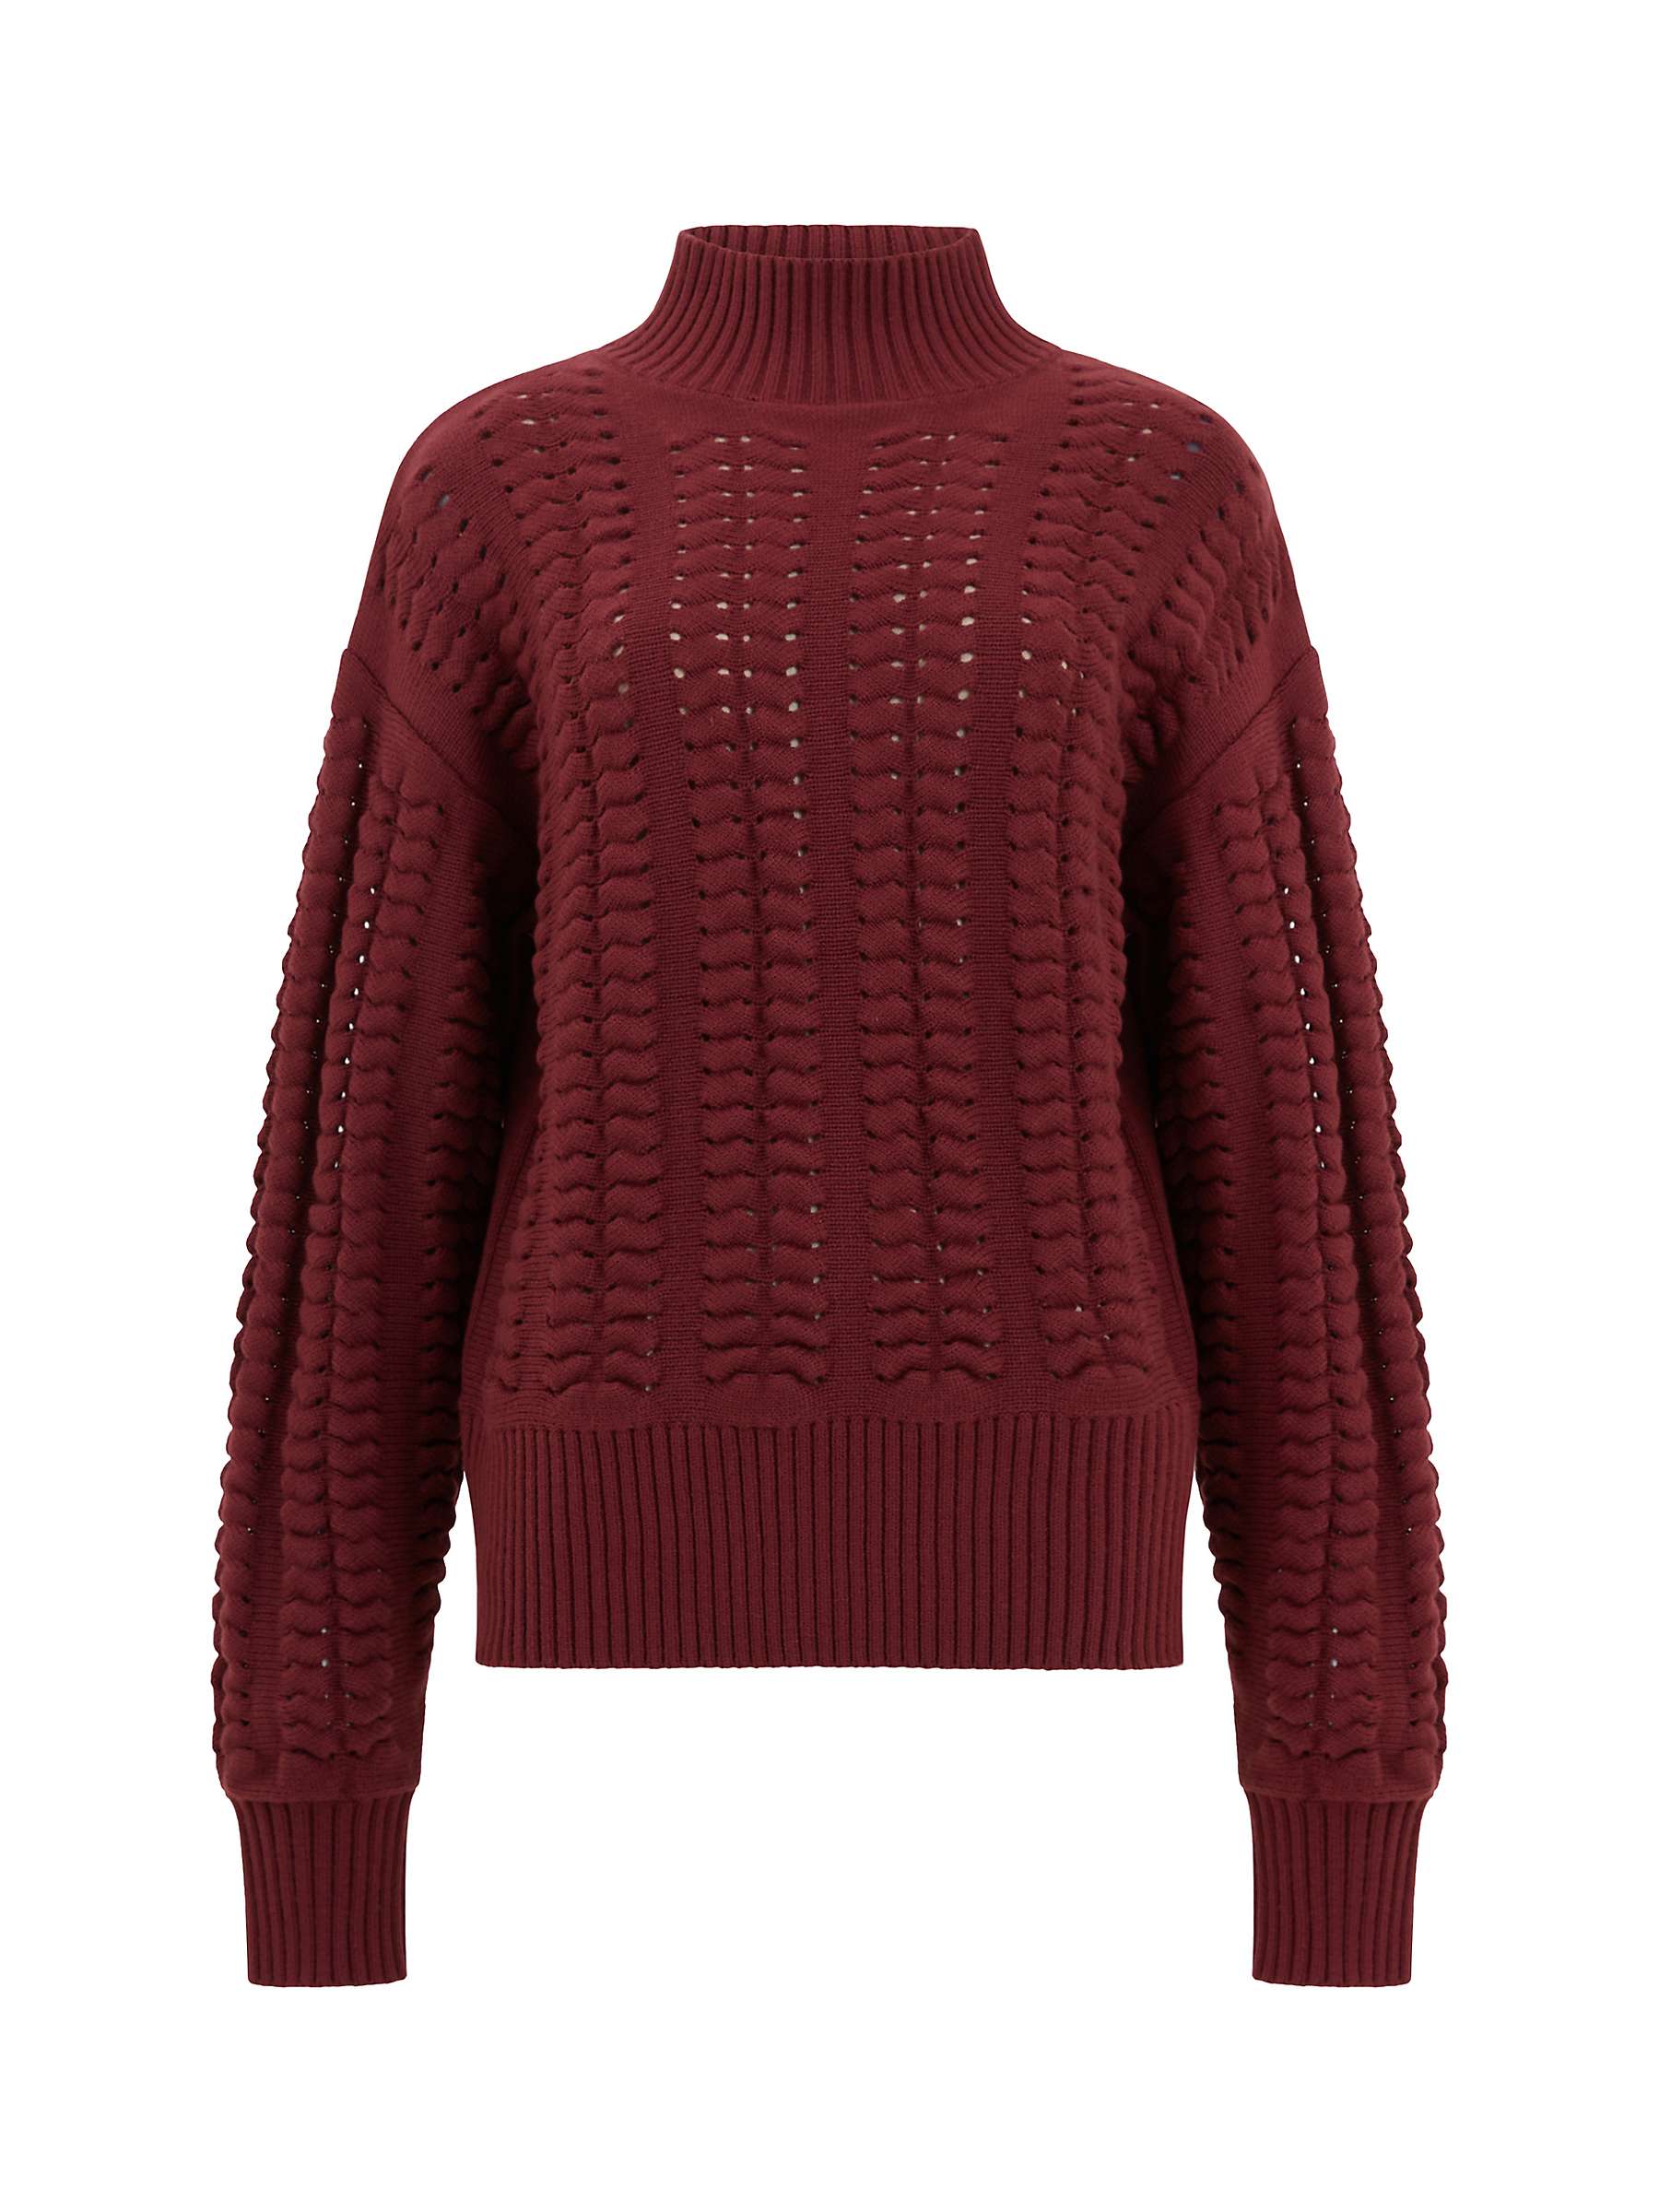 Buy French Connection Jolee Jumper, Chocolate Truffle Online at johnlewis.com